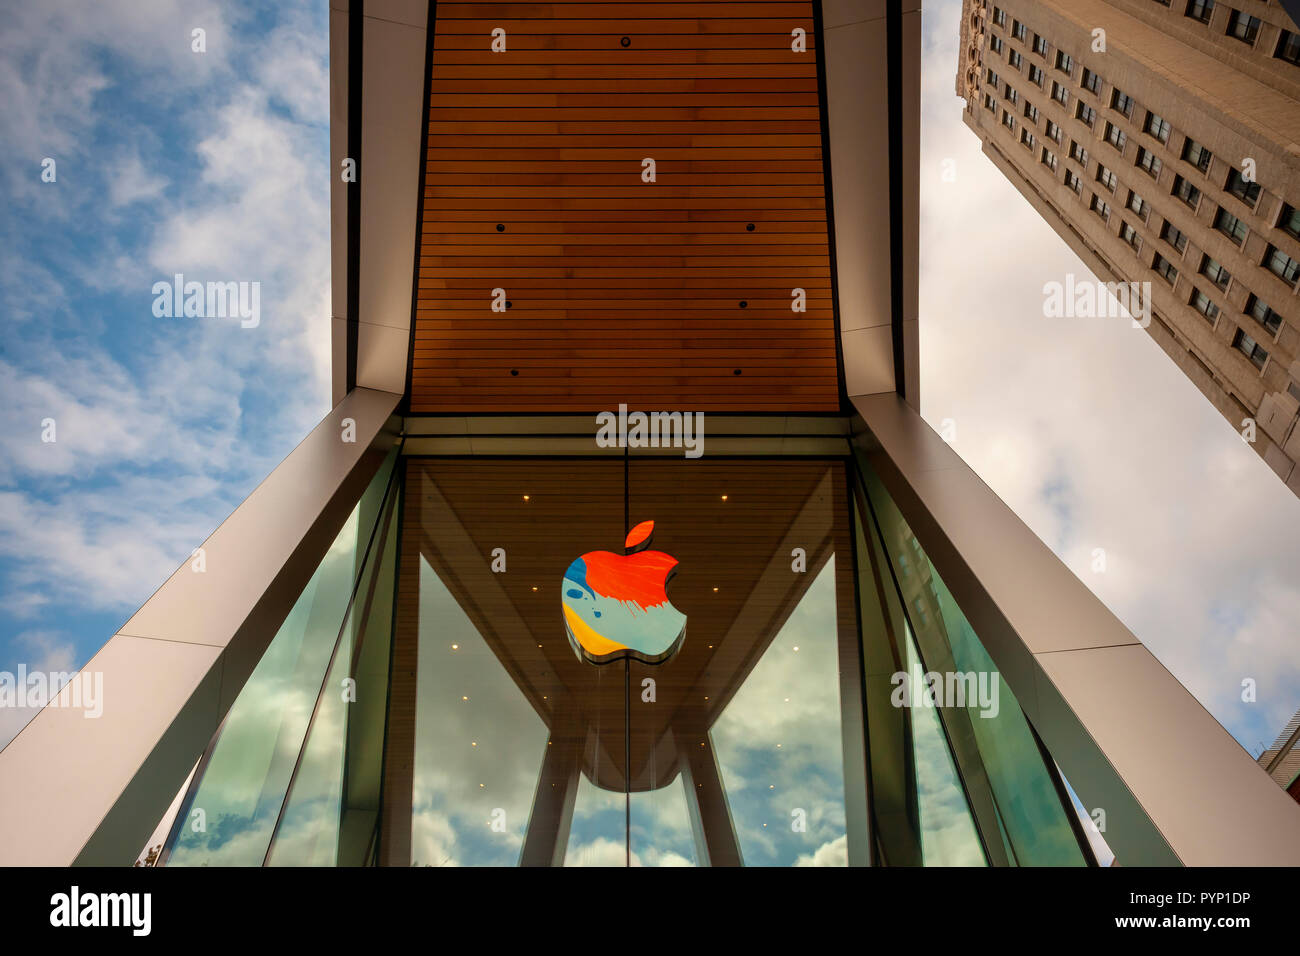 New York, USA. 29th October, 2018. The Downtown Brooklyn Apple store in New York is seen decorated on Monday, October 29, 2018 in advance of Tuesday's Apple product announcement taking place across the street in the Brooklyn Academy of Music. Apple is expected to release updated versions of the iPad and Mac computers. It also is scheduled to release third-quarter earnings after the bell on Thursday. (Â© Richard B. Levine) Credit: Richard Levine/Alamy Live News Stock Photo